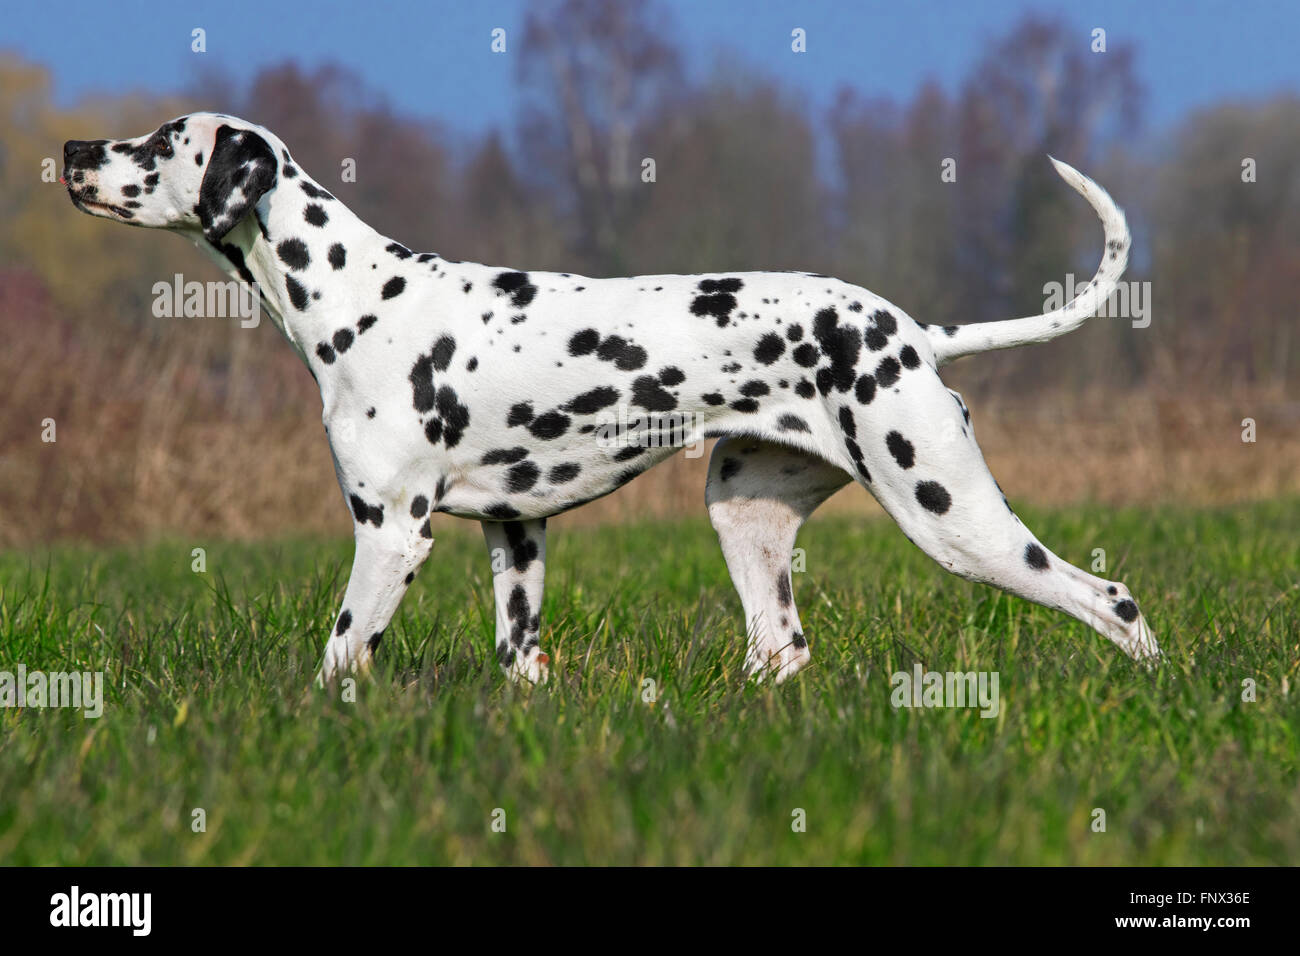 Dalmatian / carriage dog / spotted coach dog in field Stock Photo